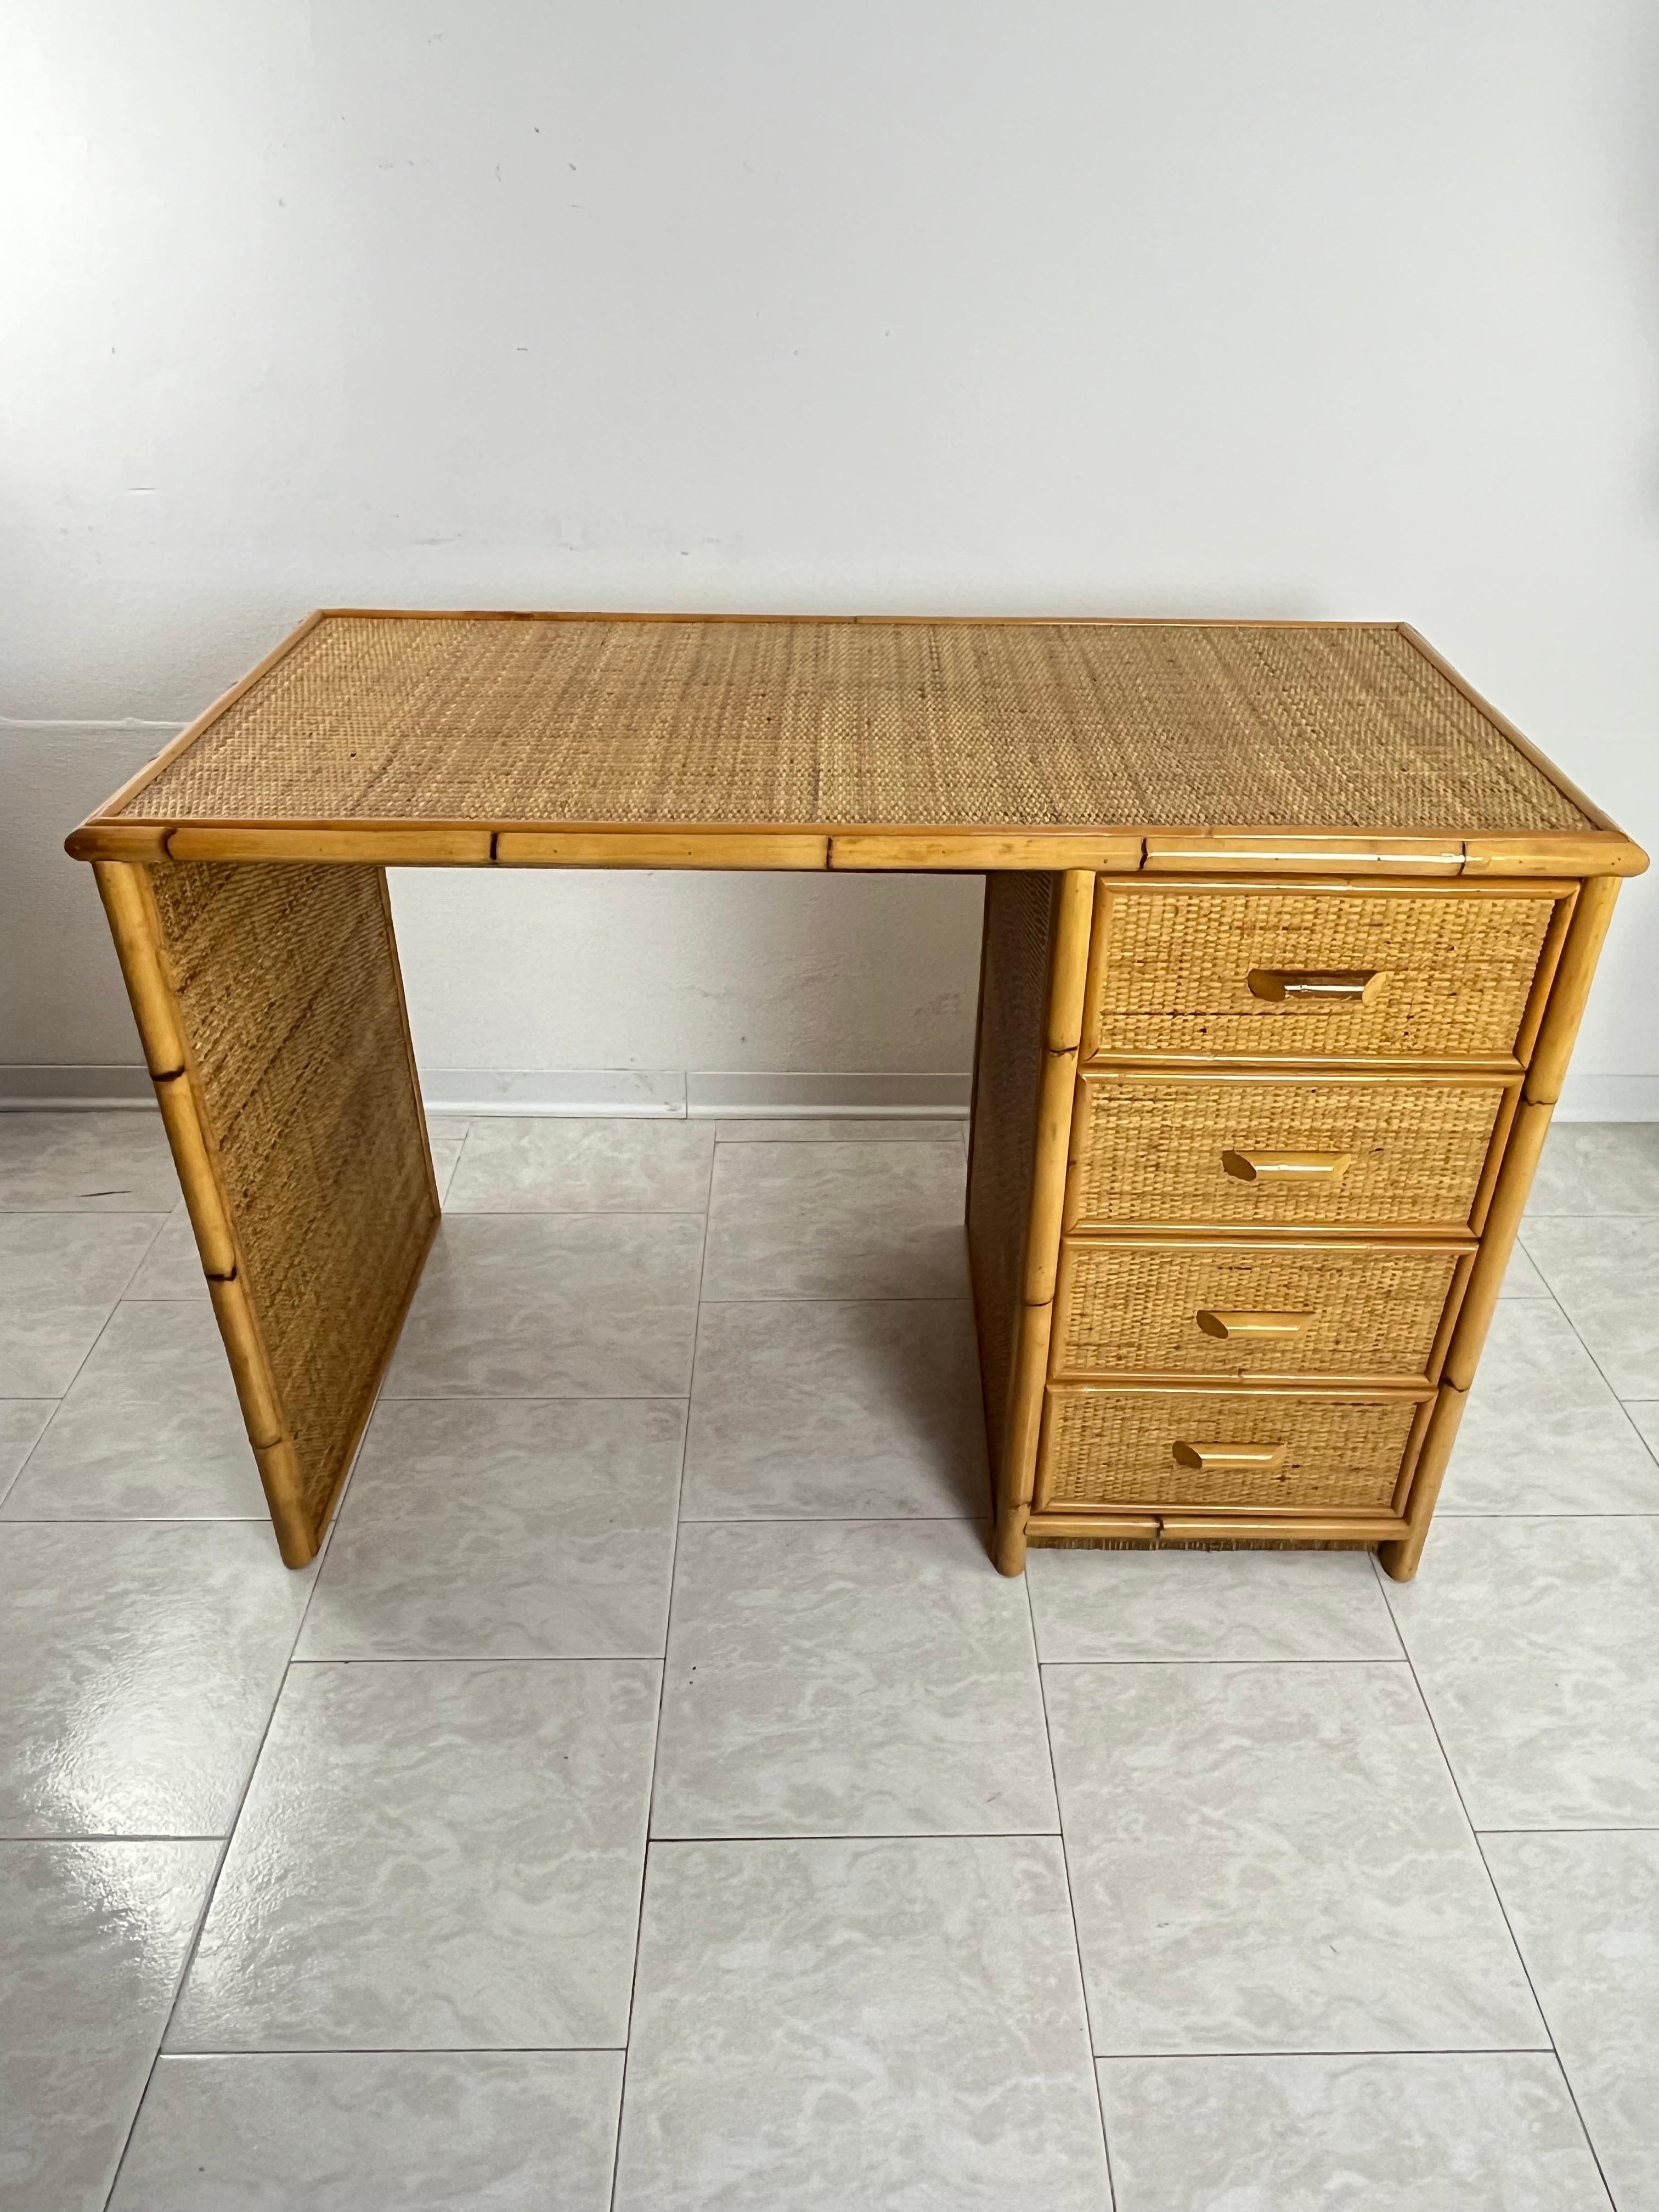 Mid-Century rattan wicker and bamboo desk attributed to Dal Vera 1960s
Complete and in good condition, it has four very spacious drawers.

Dal Vera Antonio e Figli (1884 – 1984) The factory, active from 1884 to 1984 in the Conegliano Veneto factory